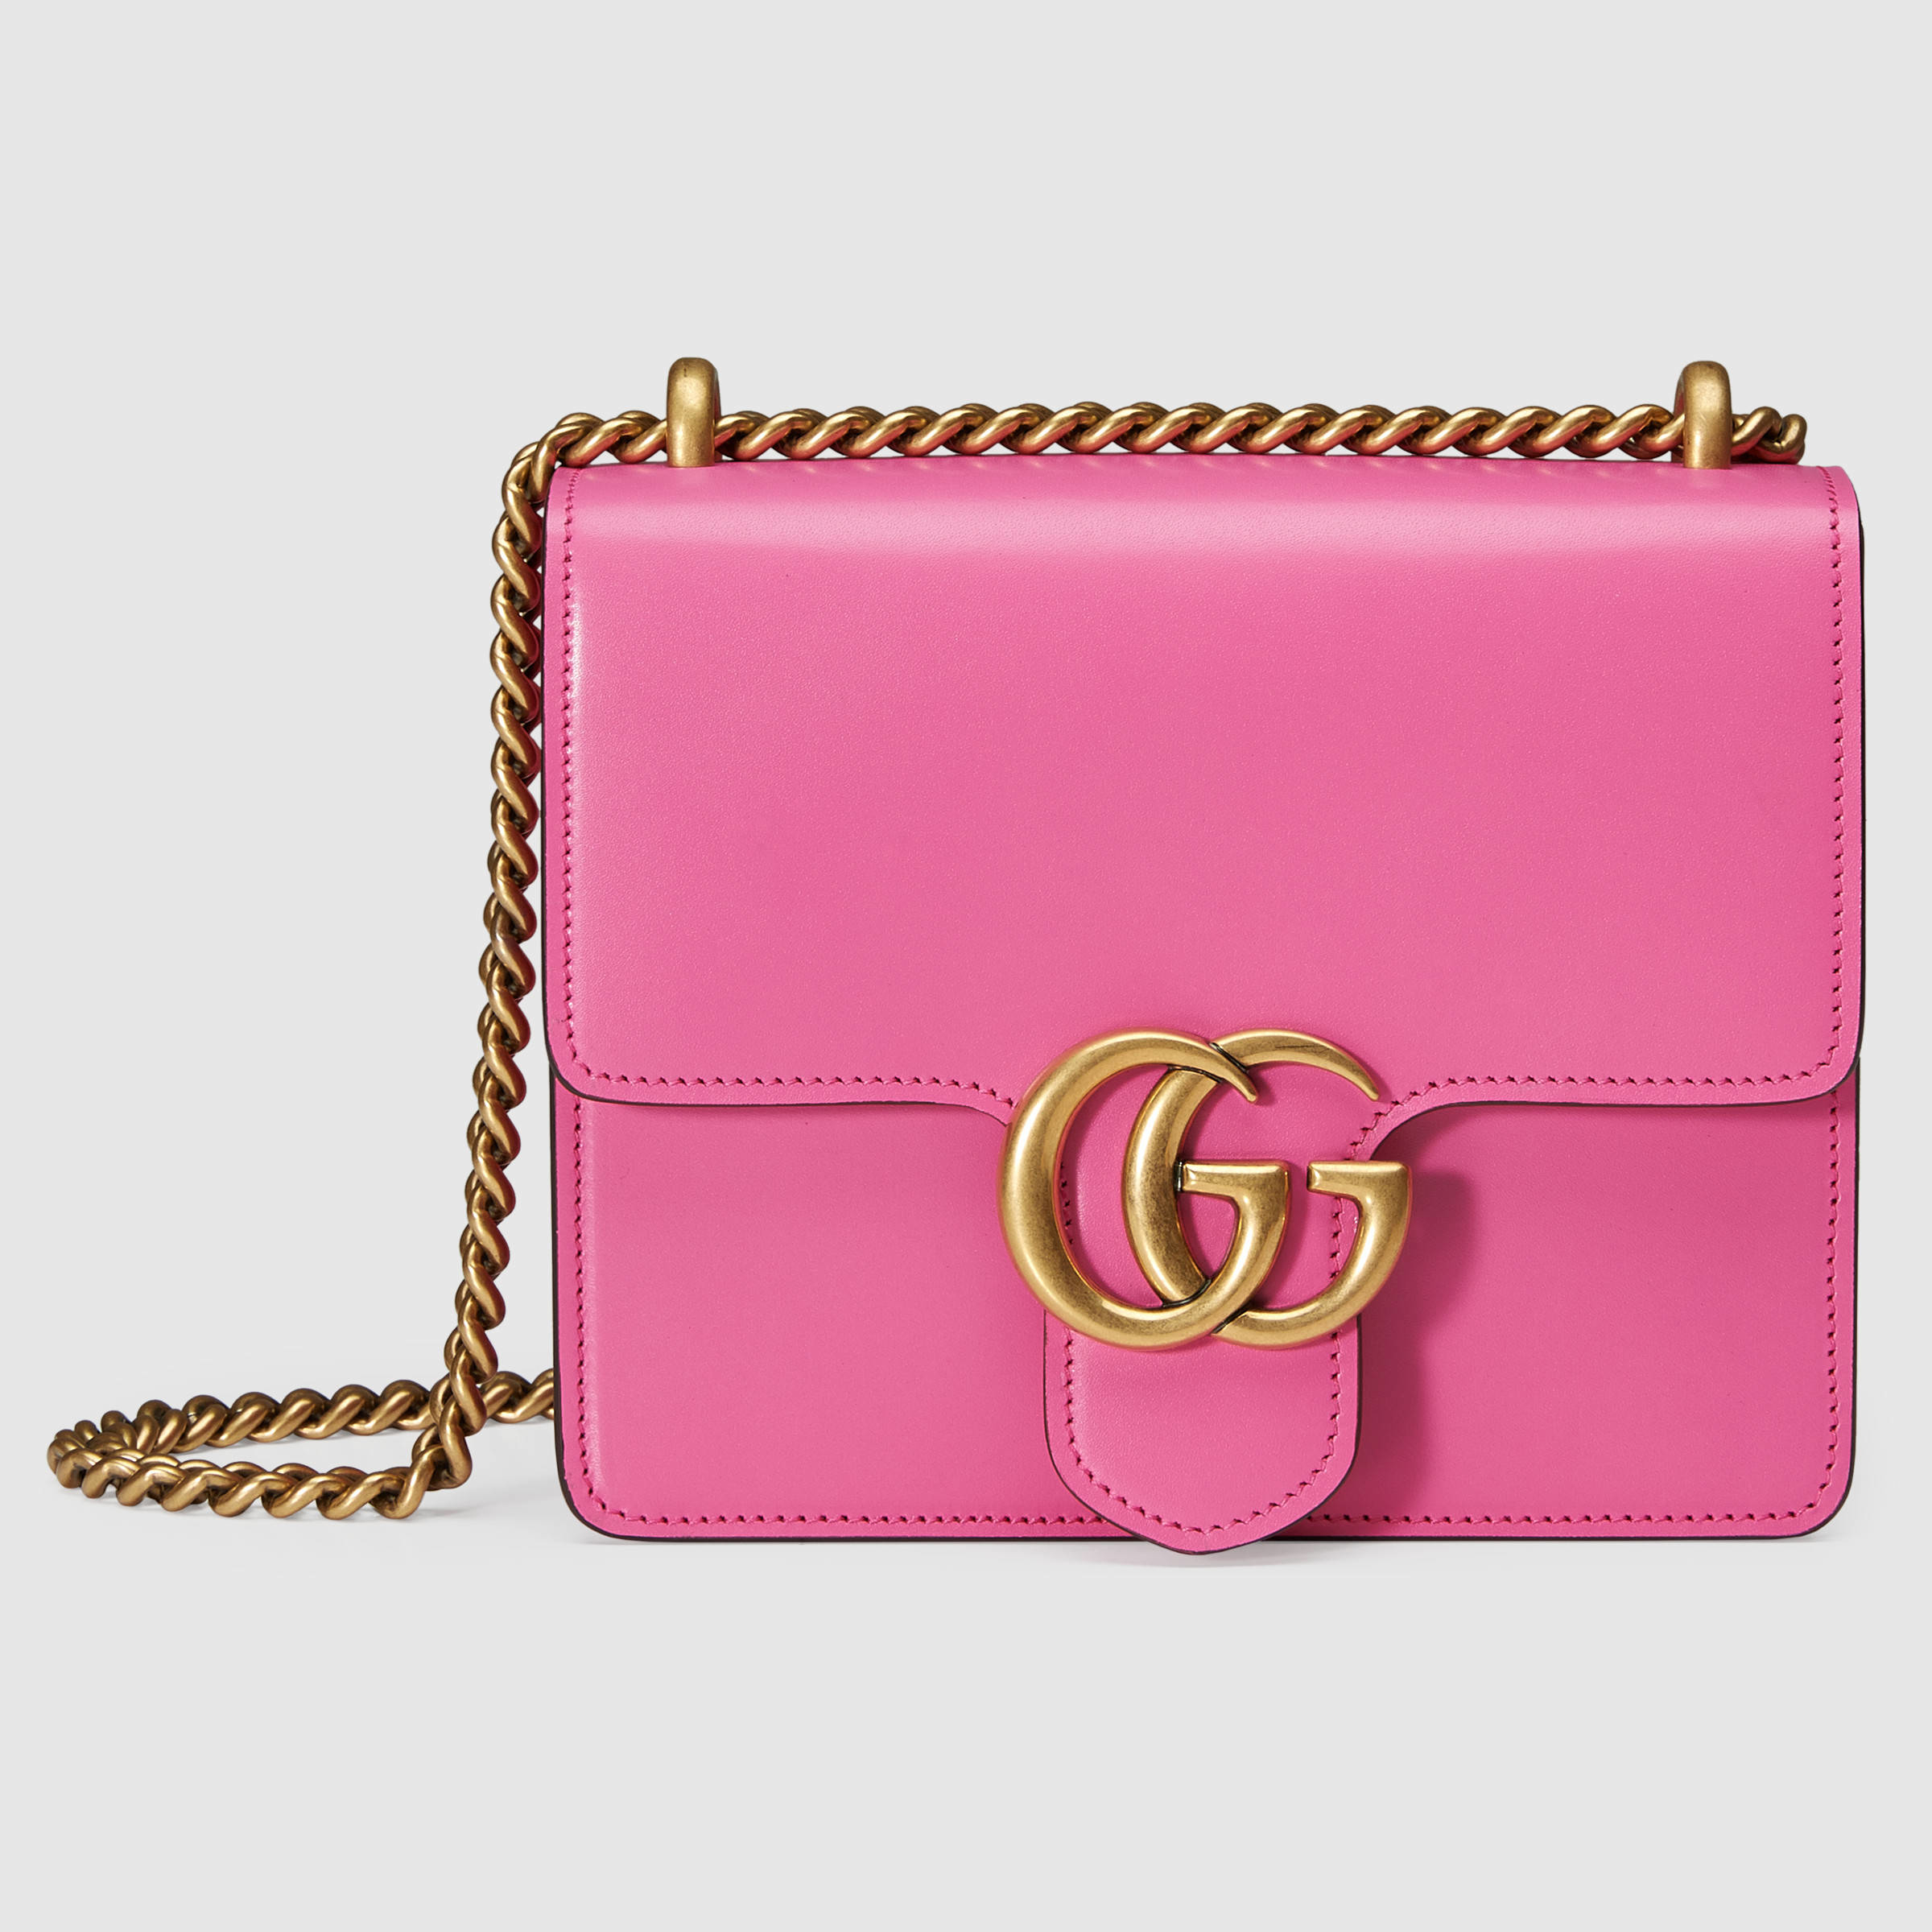 Gucci Gg Marmont Leather Shoulder Bag in Pink (pink leather) | Lyst